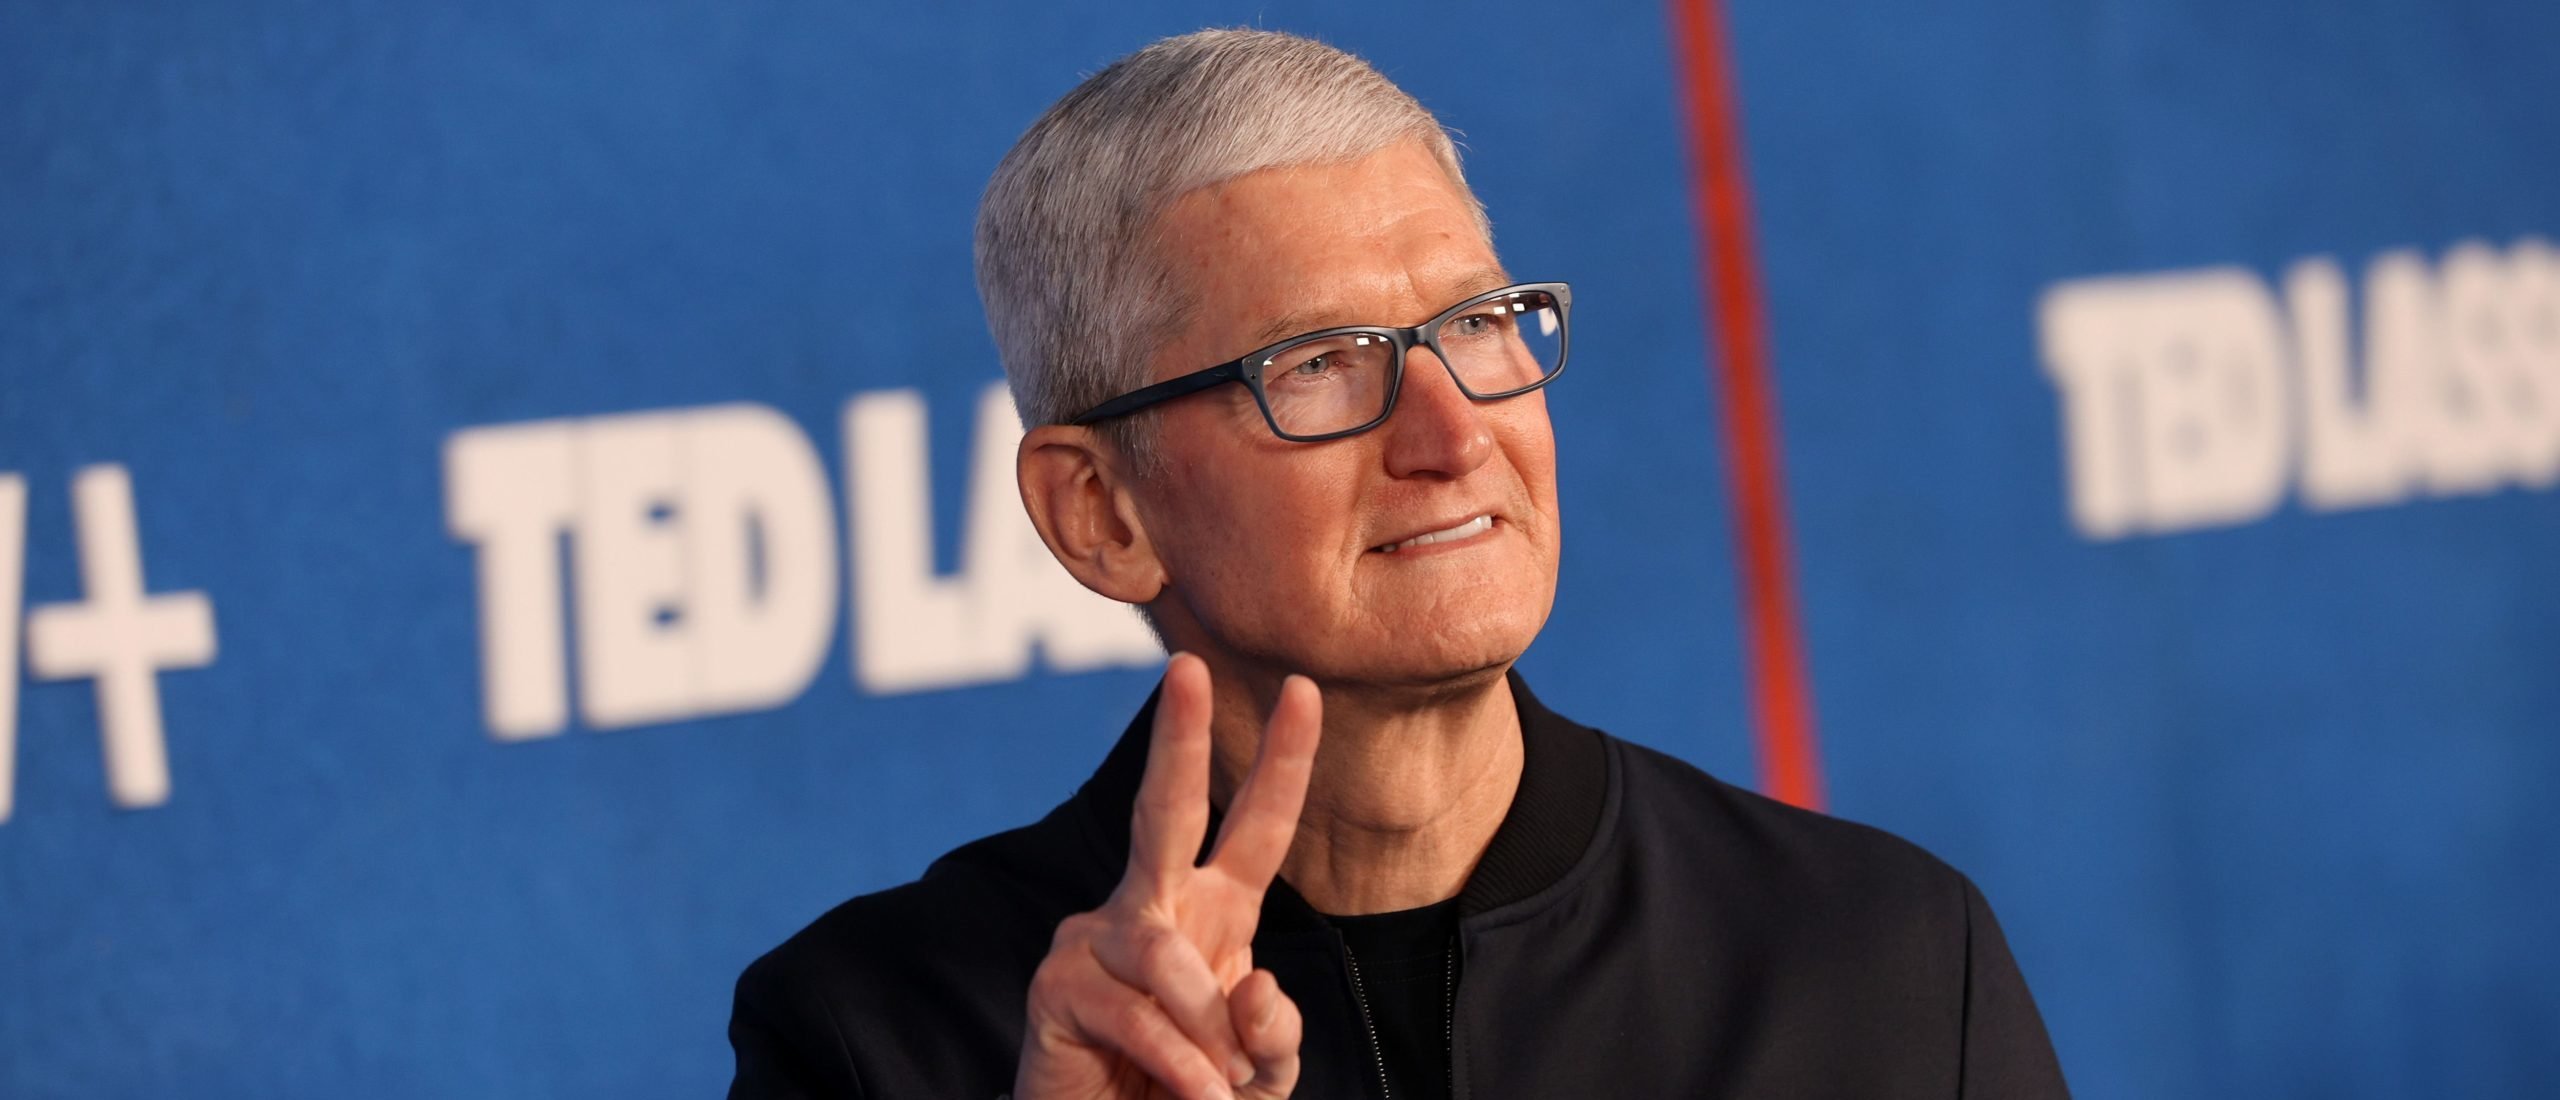 Apple CEO Tim Cook attends Apple's "Ted Lasso" season two premiere at Pacific Design Center on July 15, 2021 in West Hollywood, California. (Photo by Kevin Winter/Getty Images)